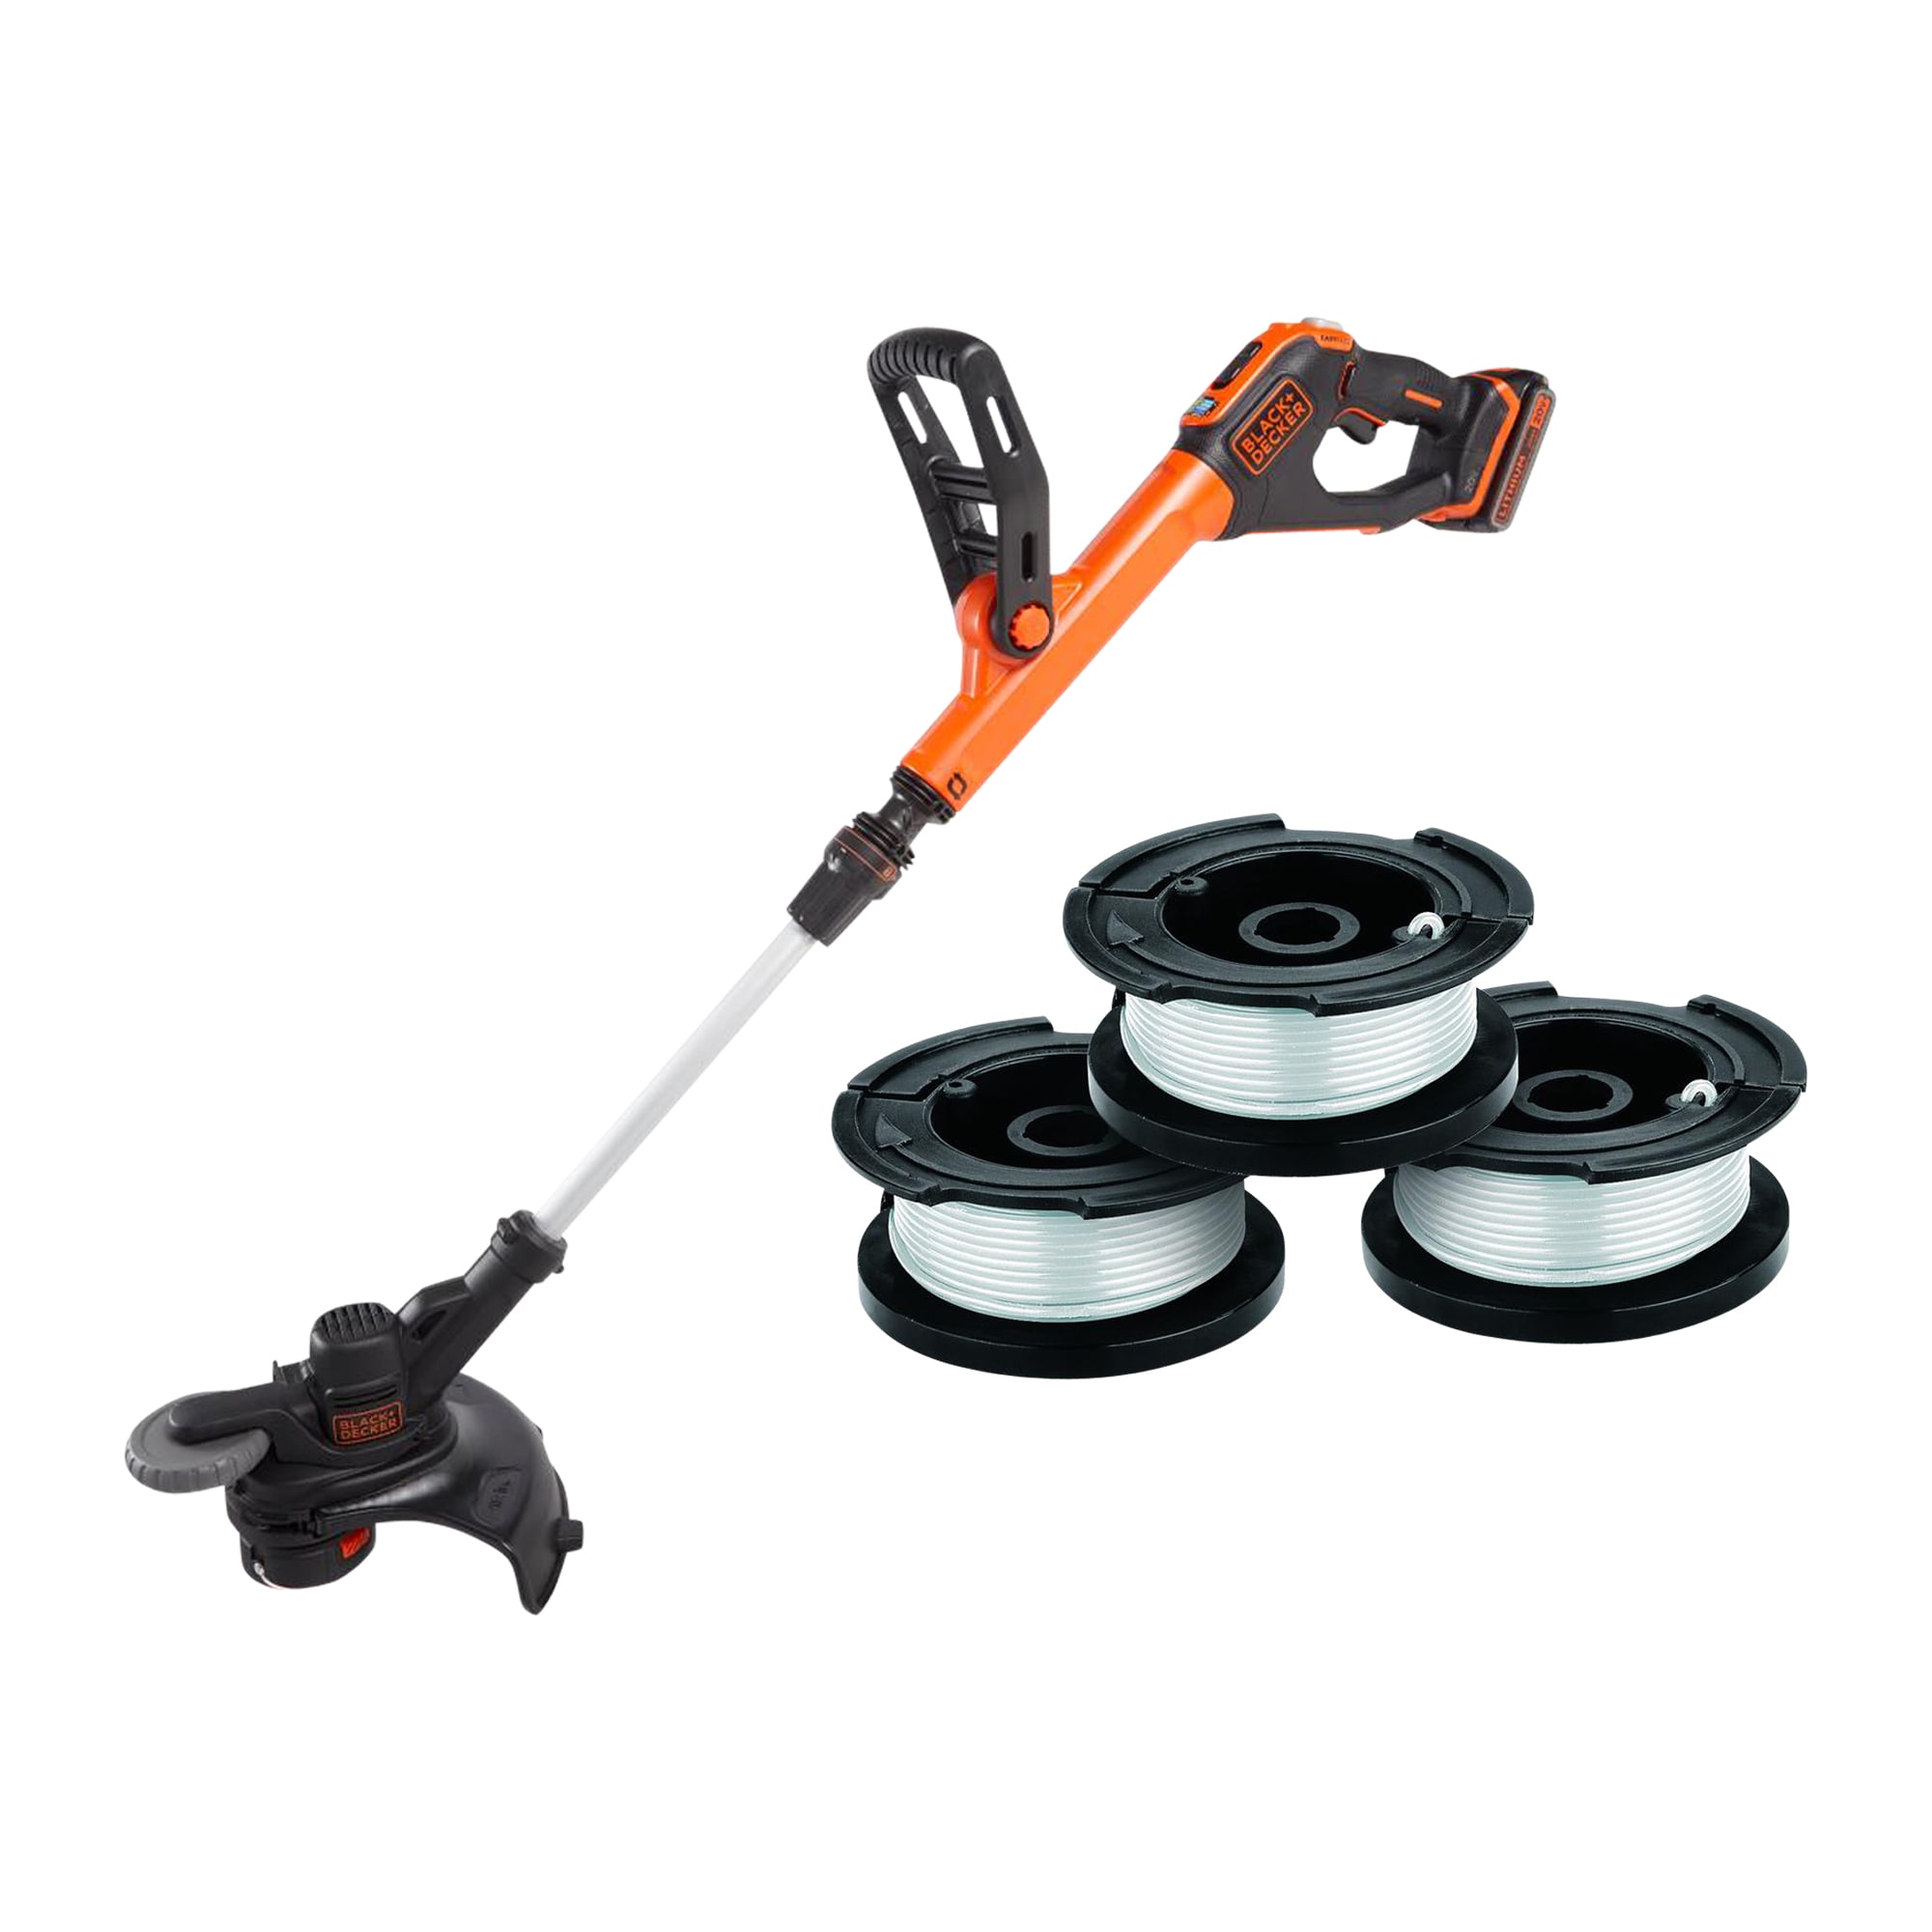 BLACK+DECKER EASYFEED 20-Volt Max 12-in Straight Cordless String Trimmer  With Edger Capable & Grass Hog Replacement Spool